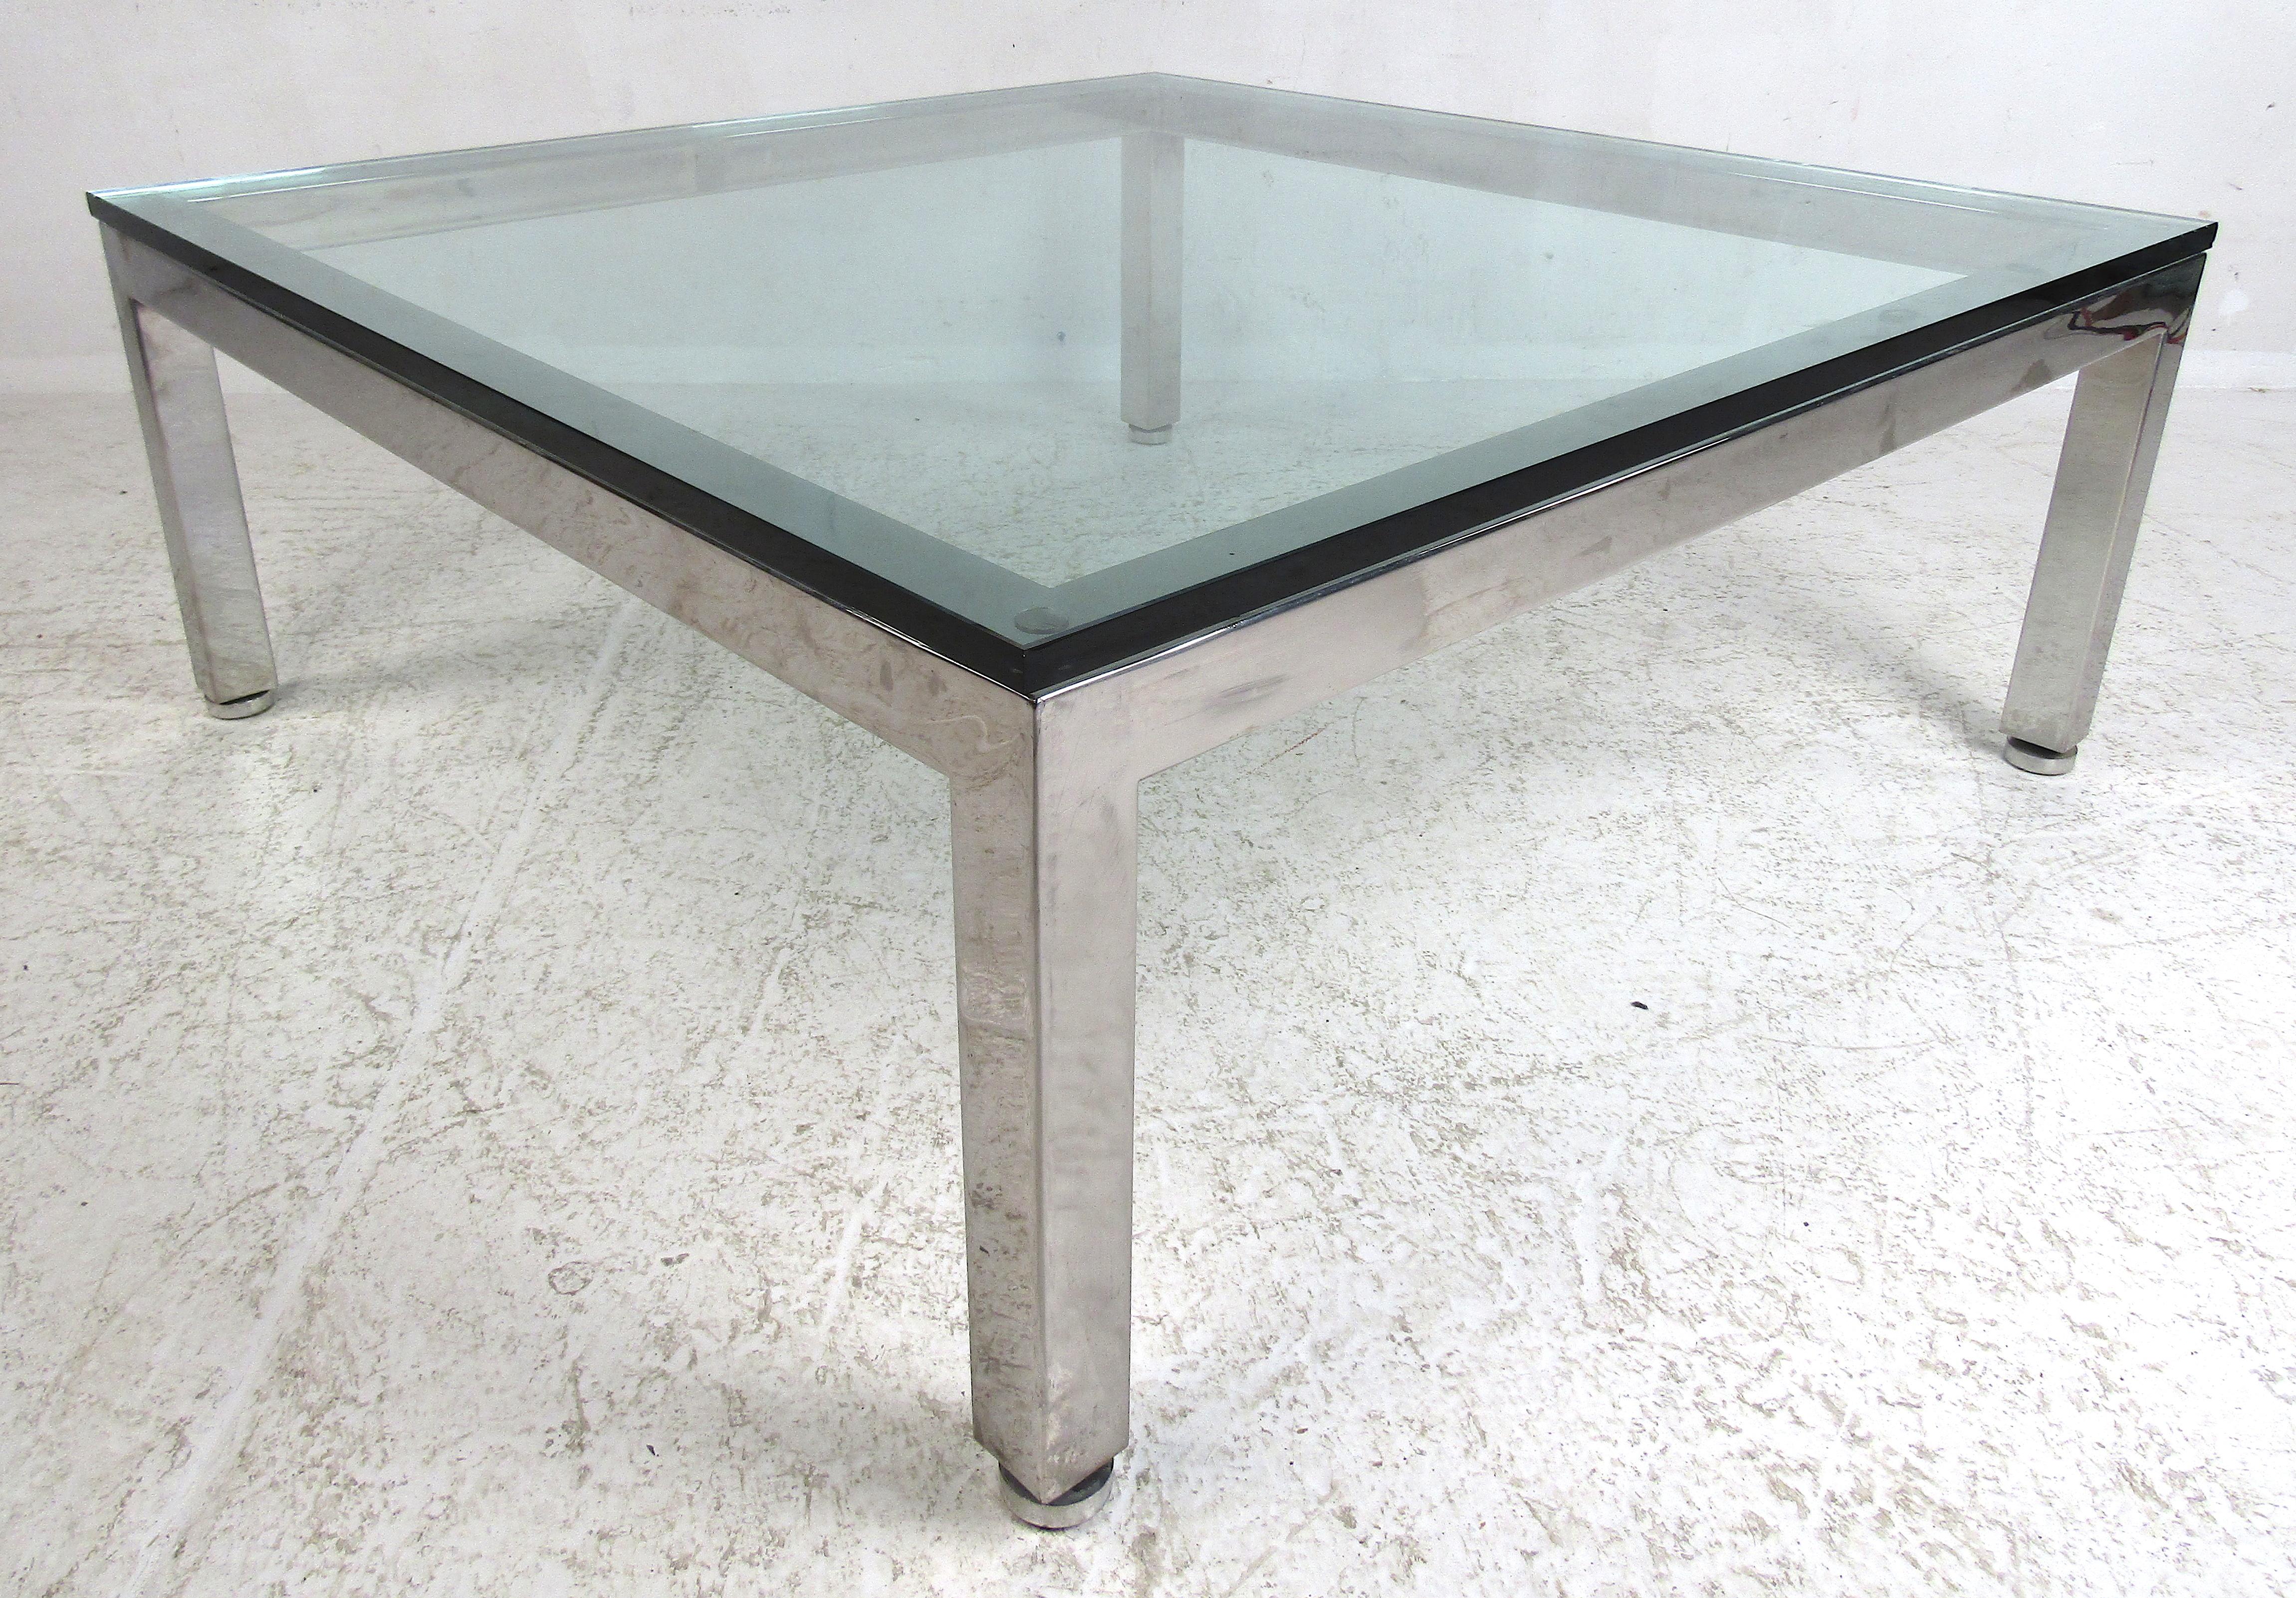 This beautiful vintage square coffee table features a very thick glass top with slightly beveled edges. Sleek design with circular adjustable feet and a heavy chrome frame. This elegant Milo Baughman style cocktail table makes the perfect addition